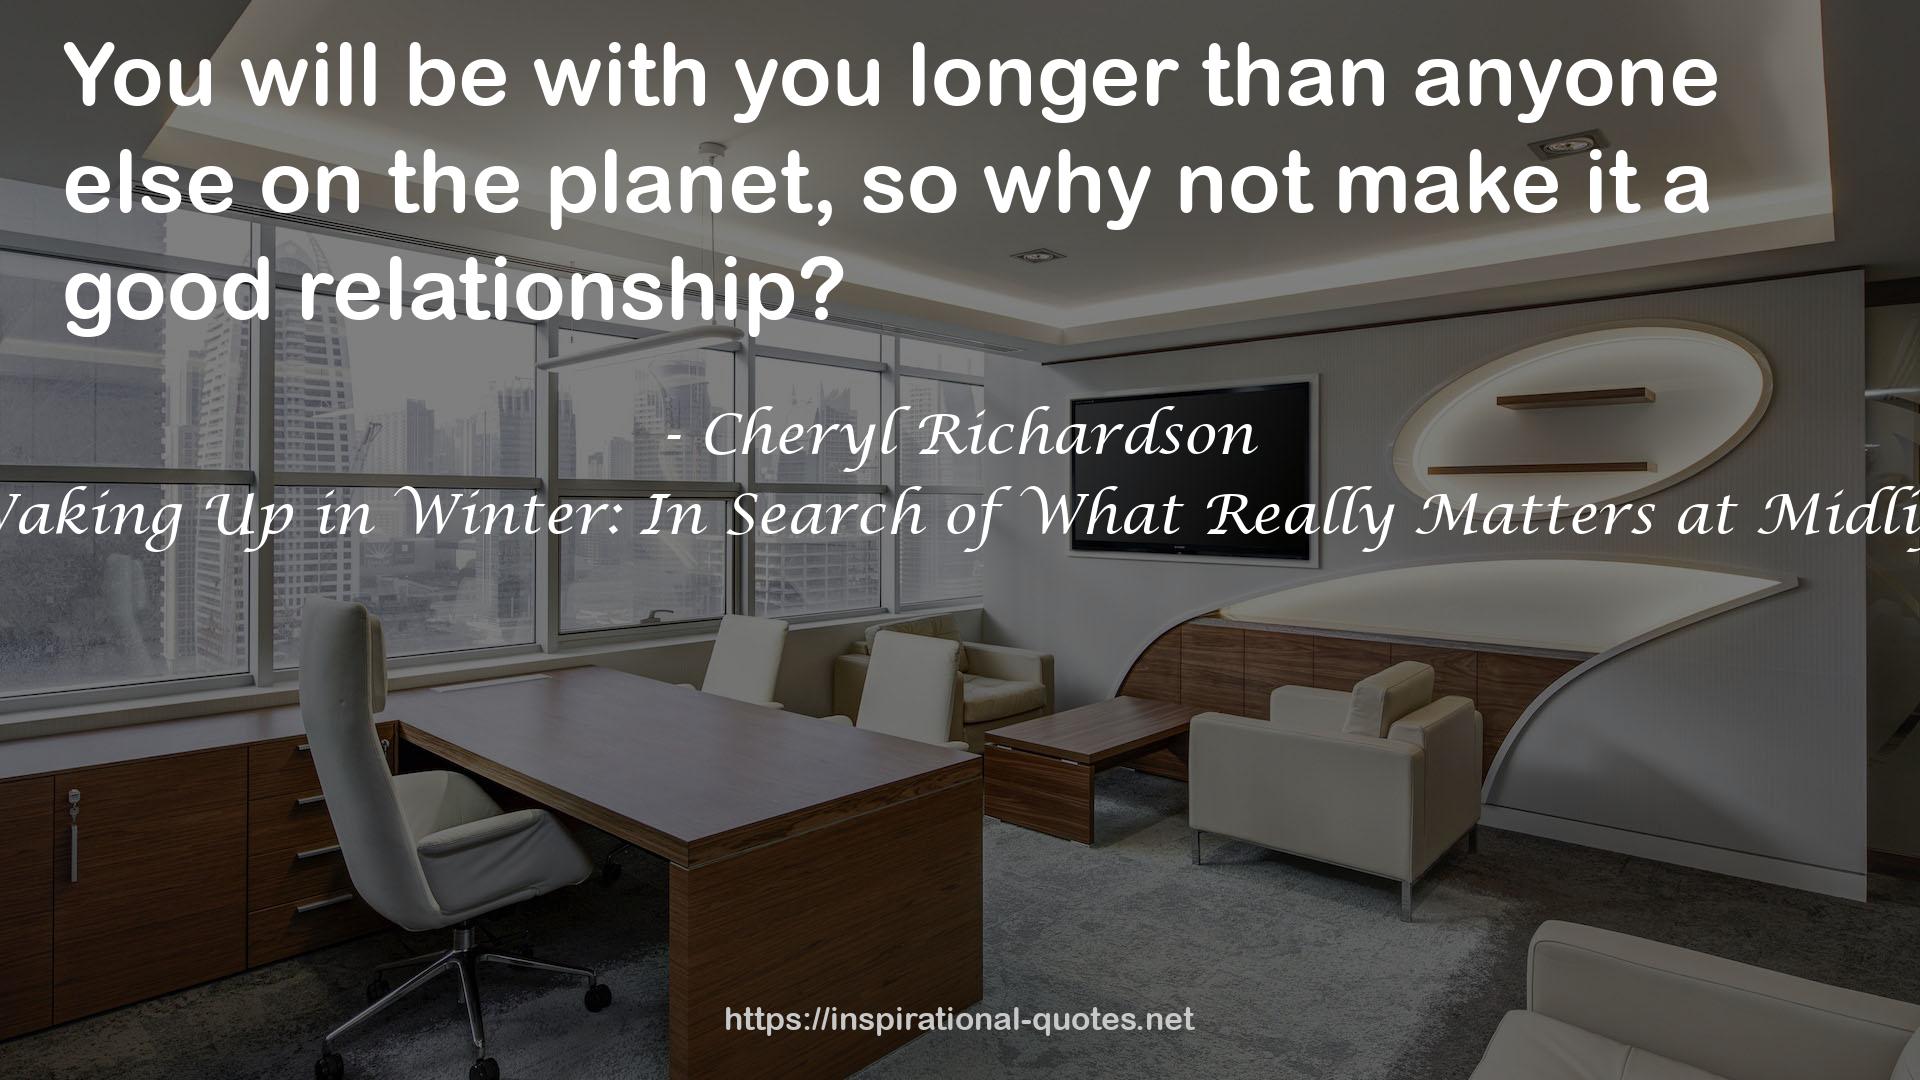 Waking Up in Winter: In Search of What Really Matters at Midlife QUOTES